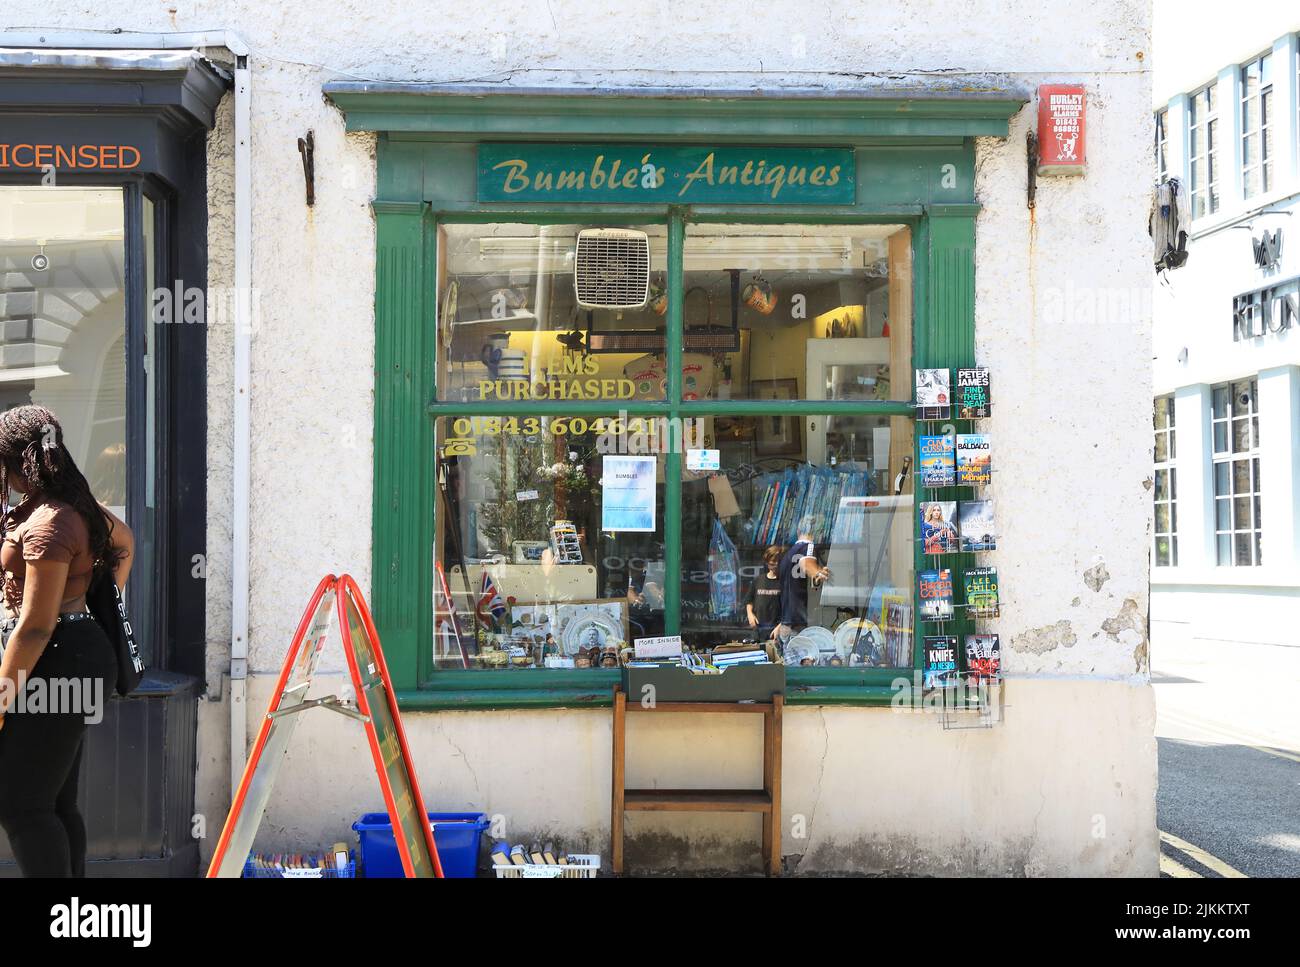 Bumble's Antiques, a friendly, helpful shop selling antiques and books, on Albion Street, in Broadstairs, Kent, UK Stock Photo